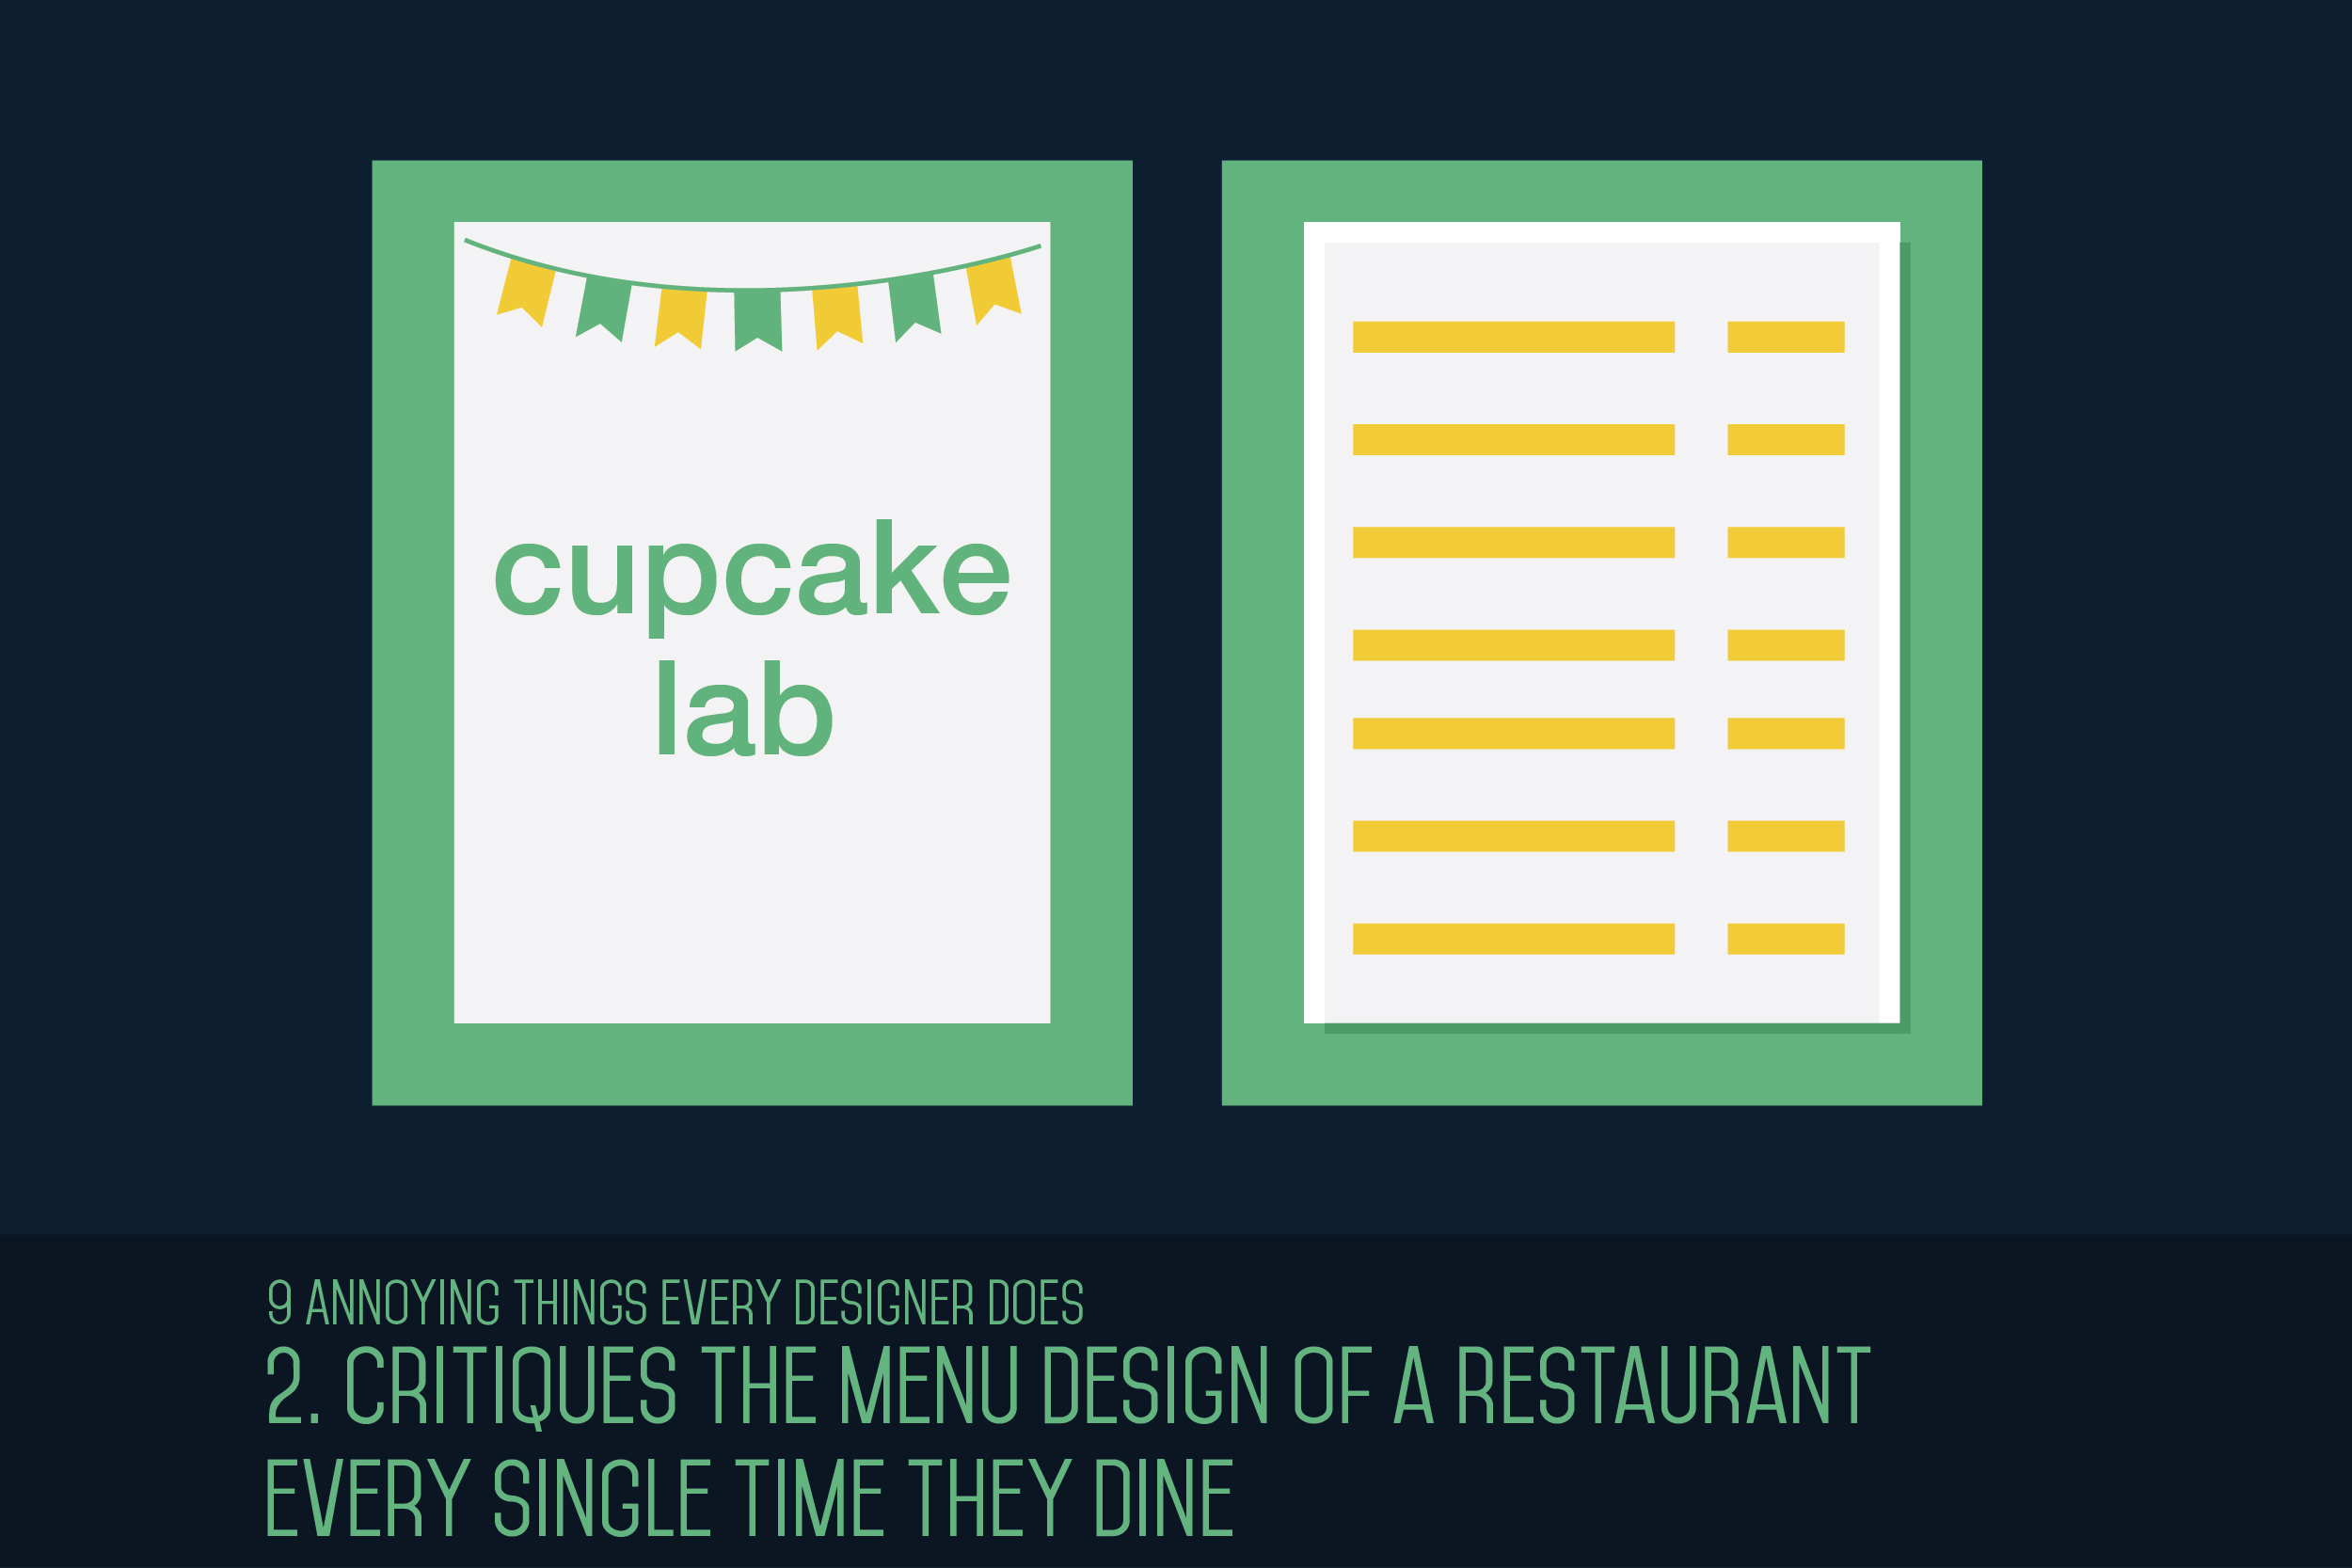 9-annoying-things-every-designer-does